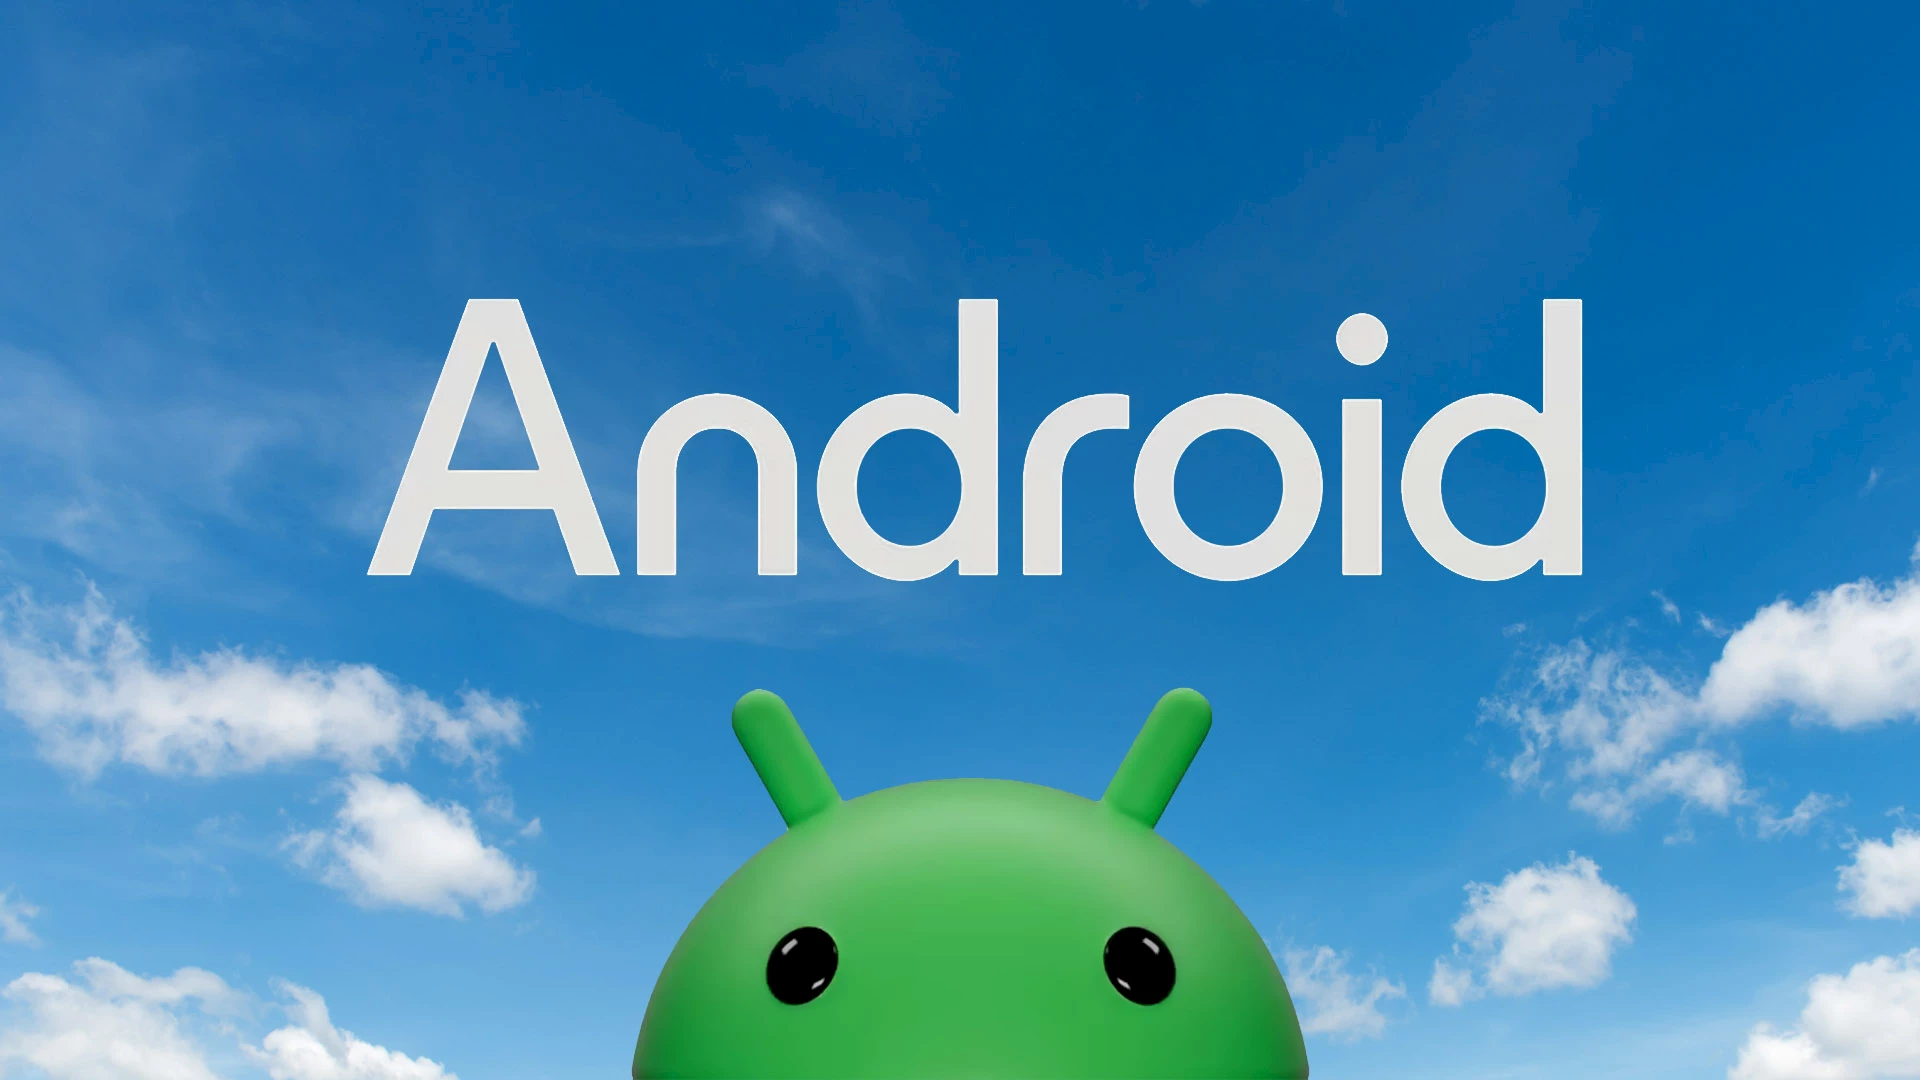 New Android logo.